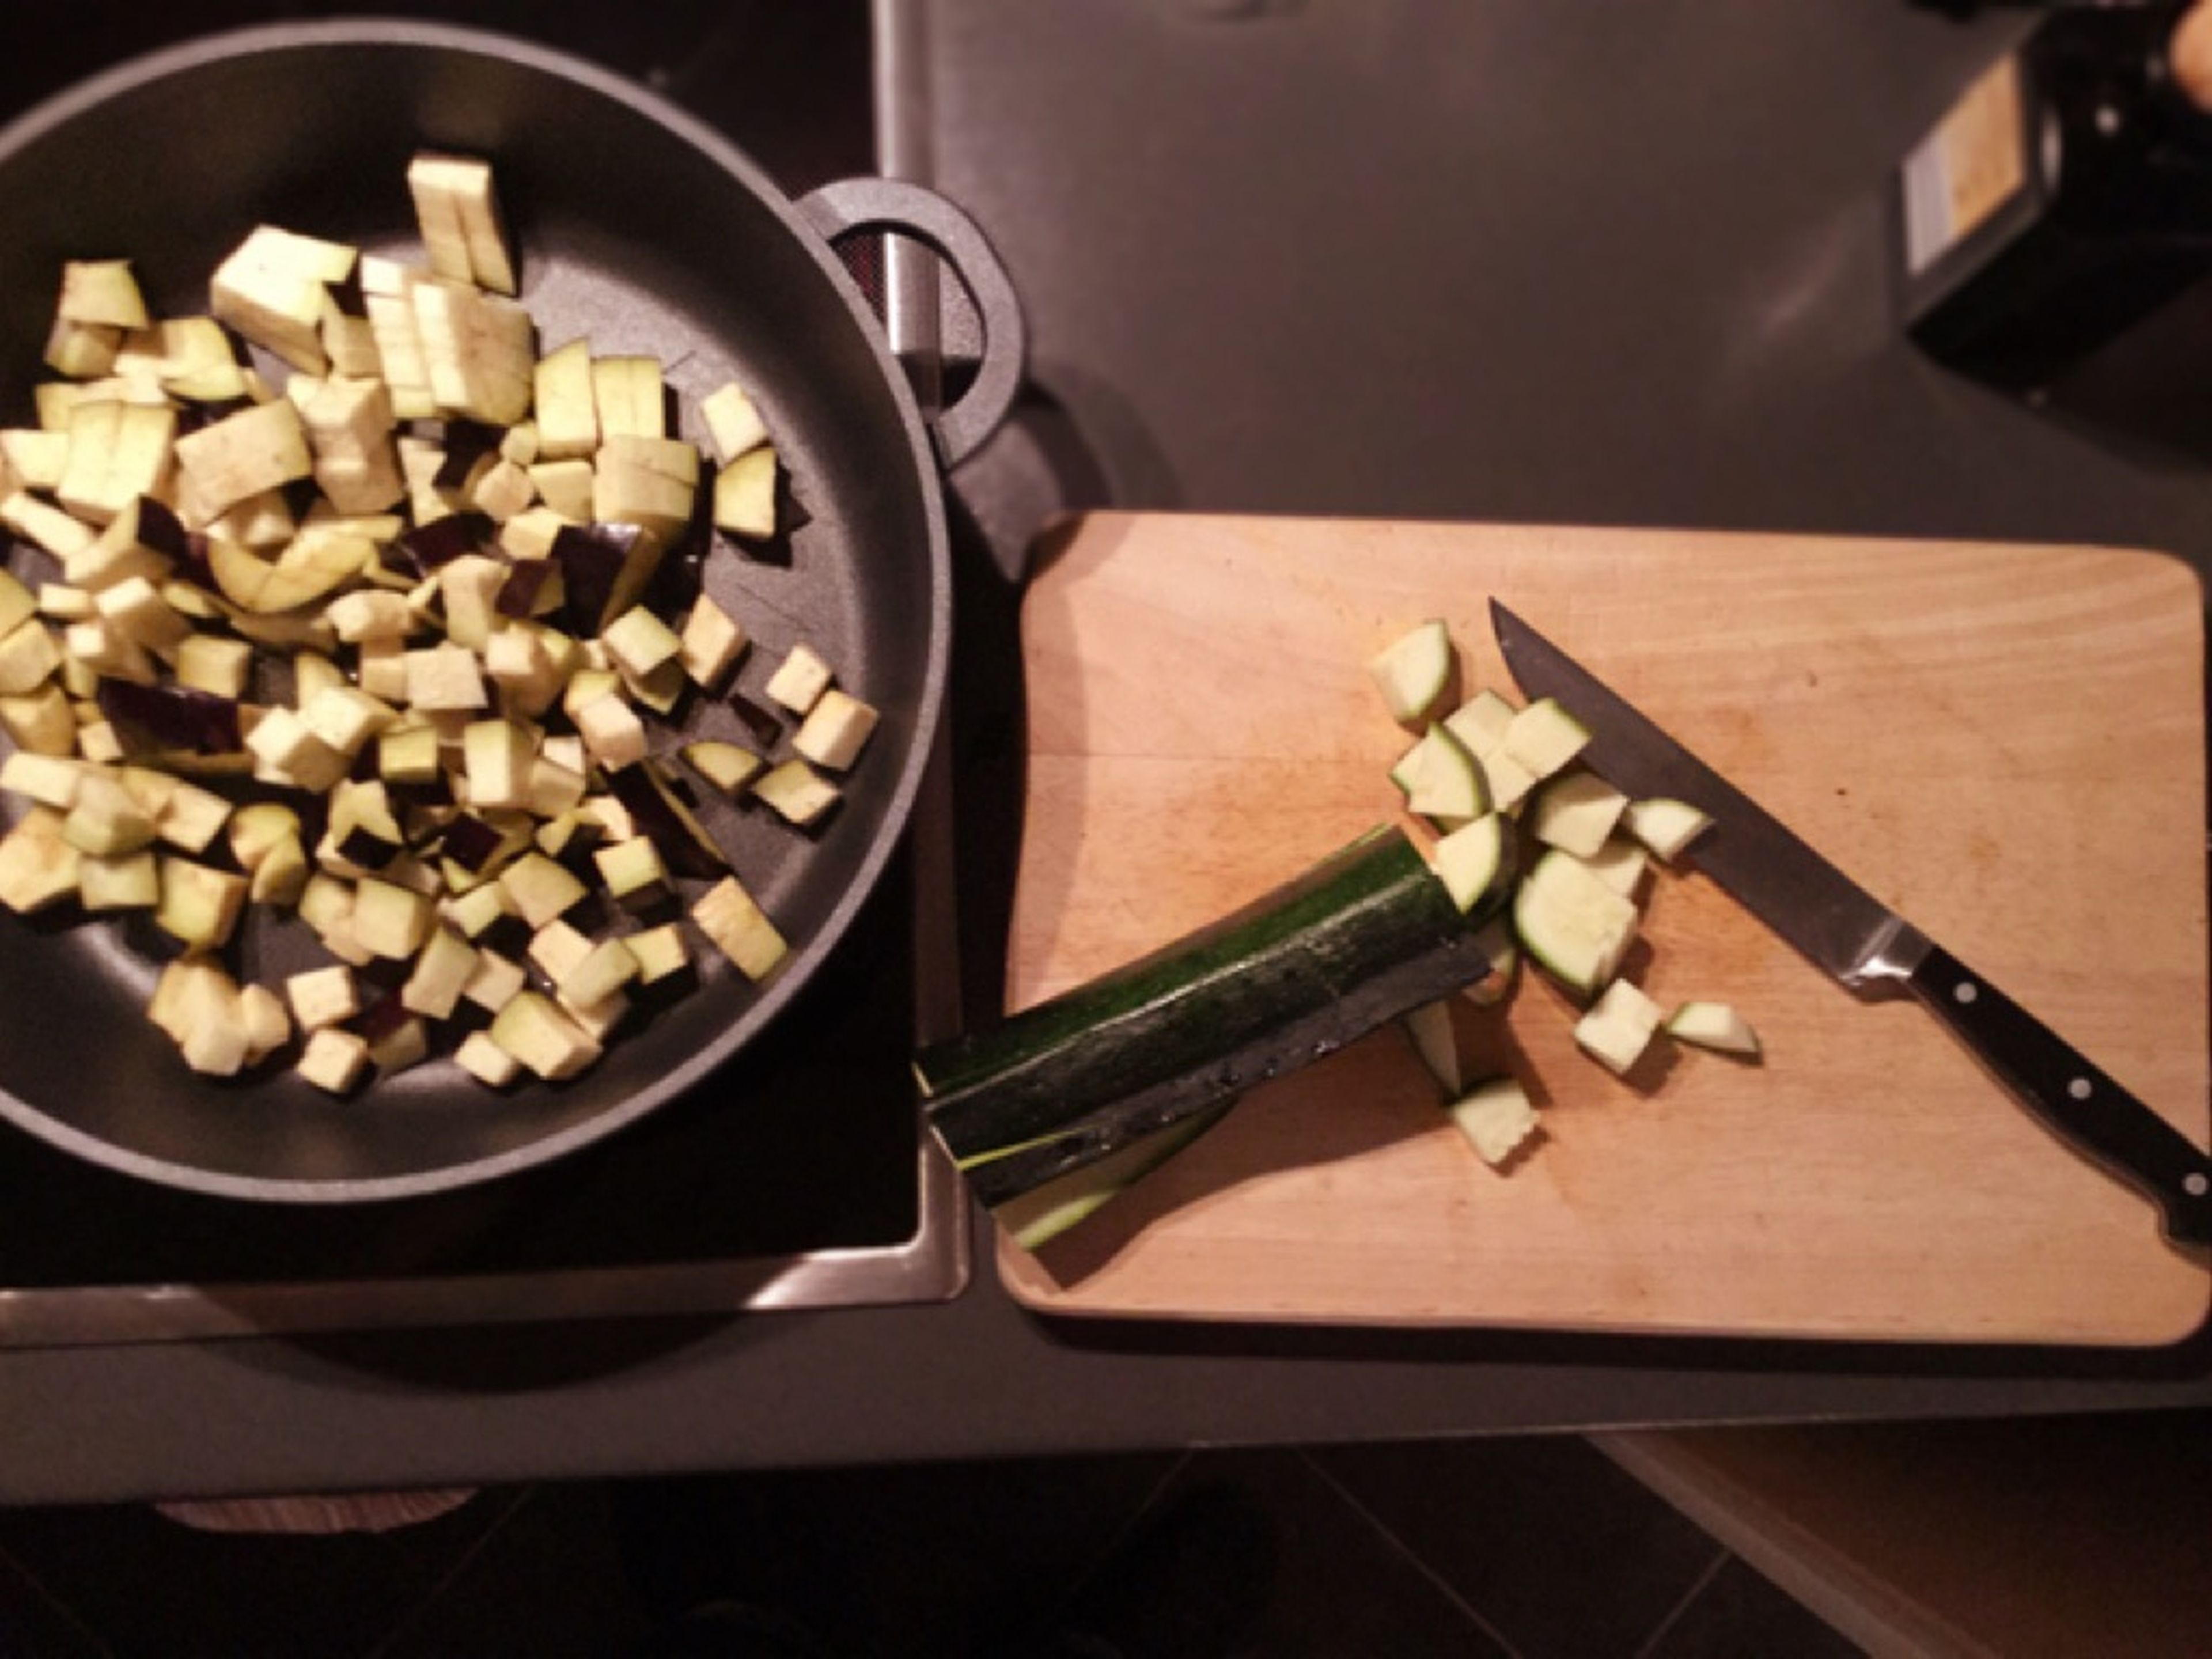 Dice zucchini, eggplant and dried tomatoes. Dice the feta and set aside.